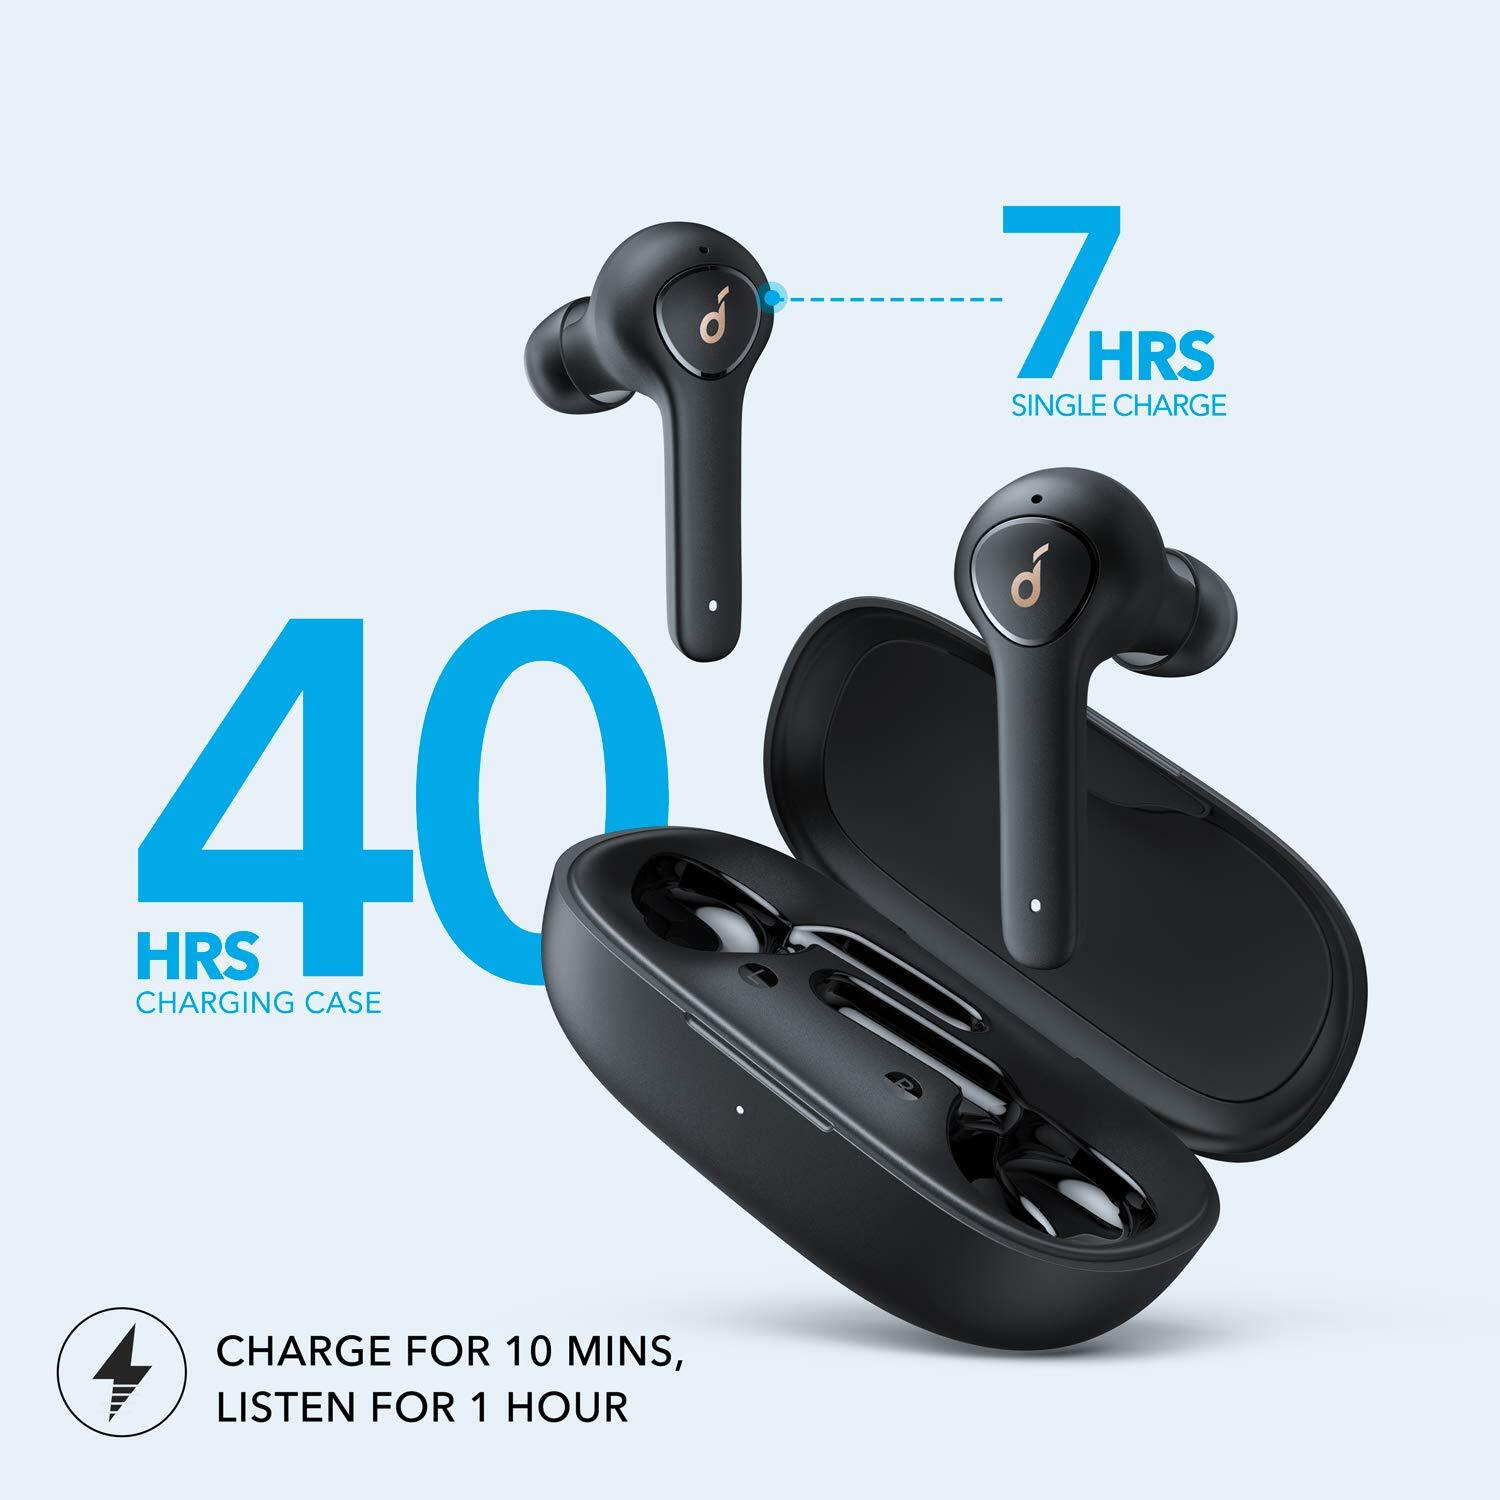 Soundcore Anker Life P2 Wireless Earbuds with 4 Microphones, cVc 8.0 Noise Reduction, Graphene Drivers for Clear Sound, USB C, Waterproof, Wireless Earphones-M000000000465 www.mysocially.com